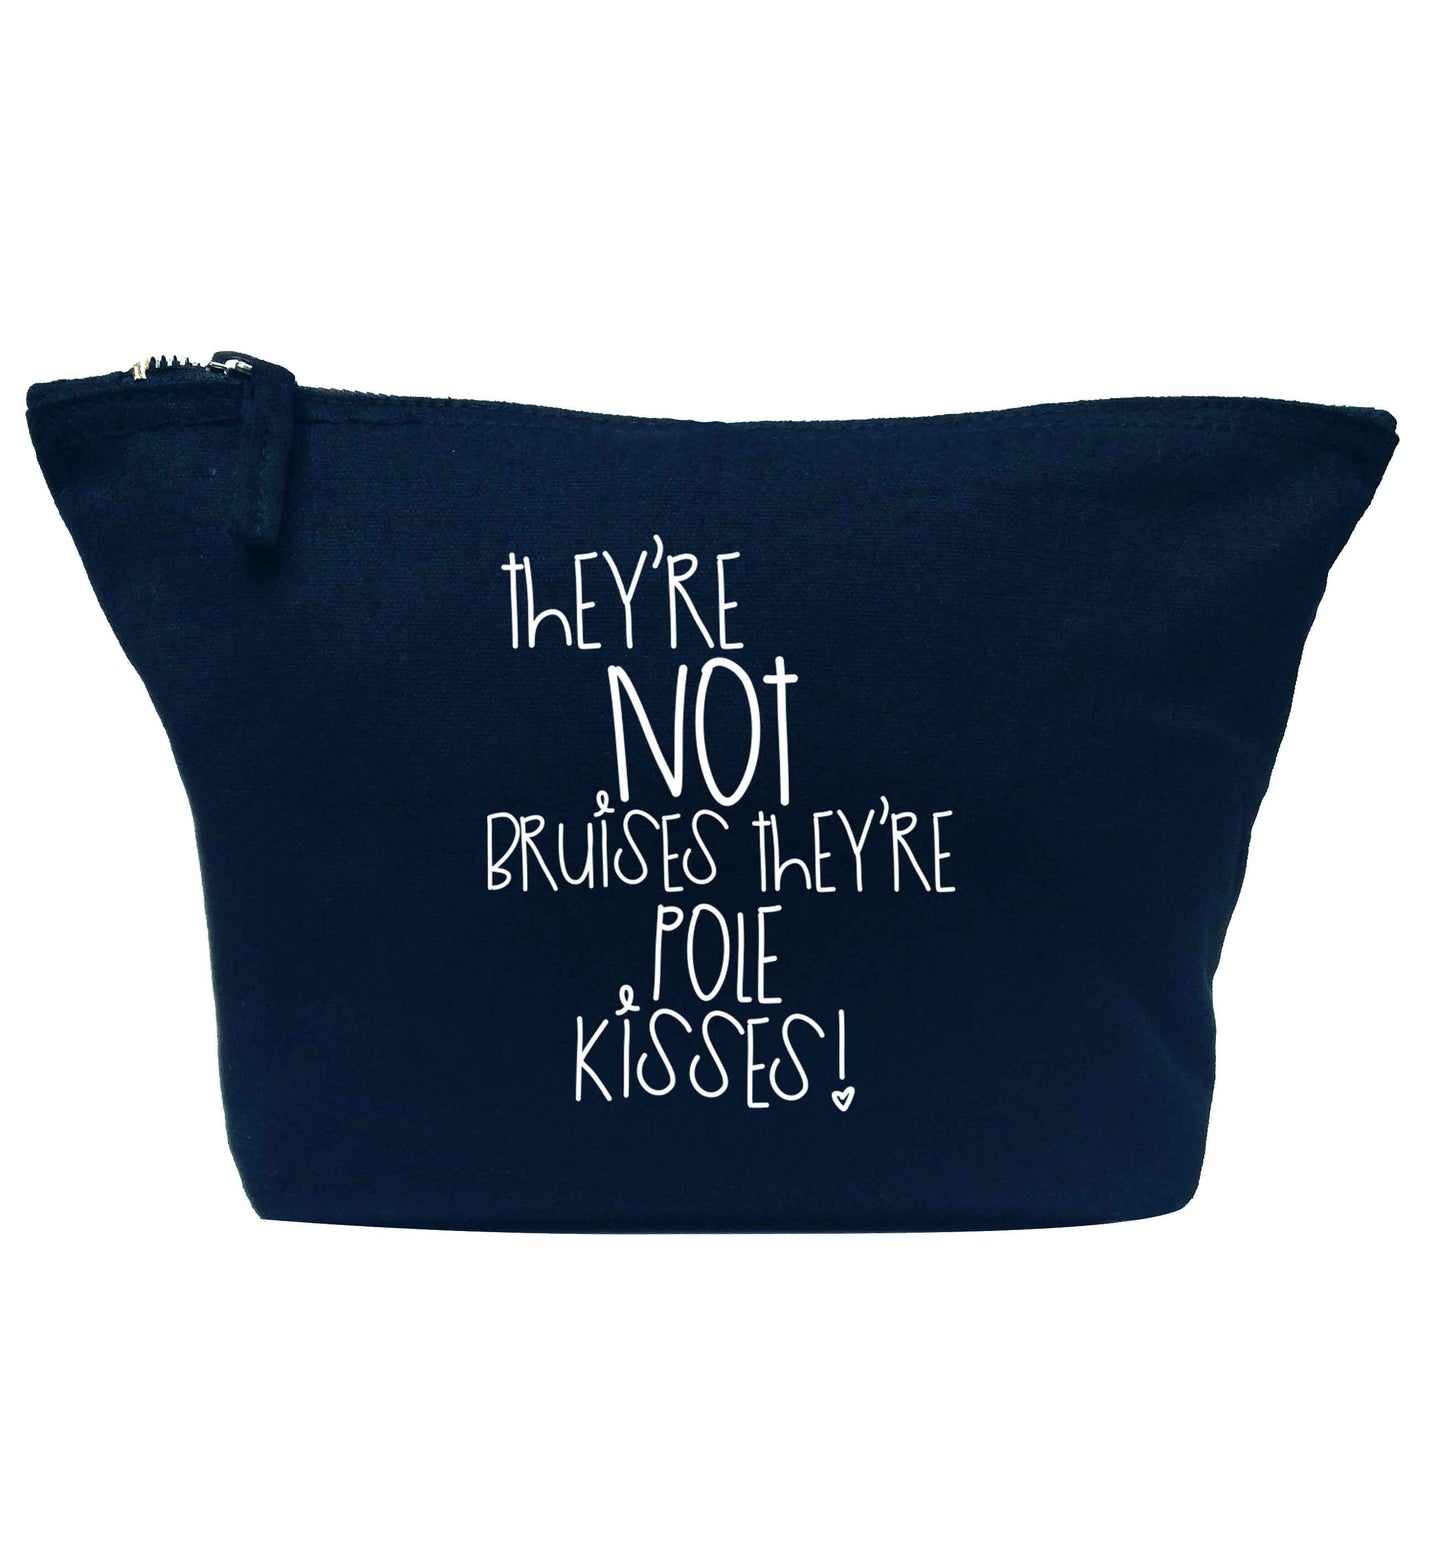 They're not bruises they're pole kisses navy makeup bag